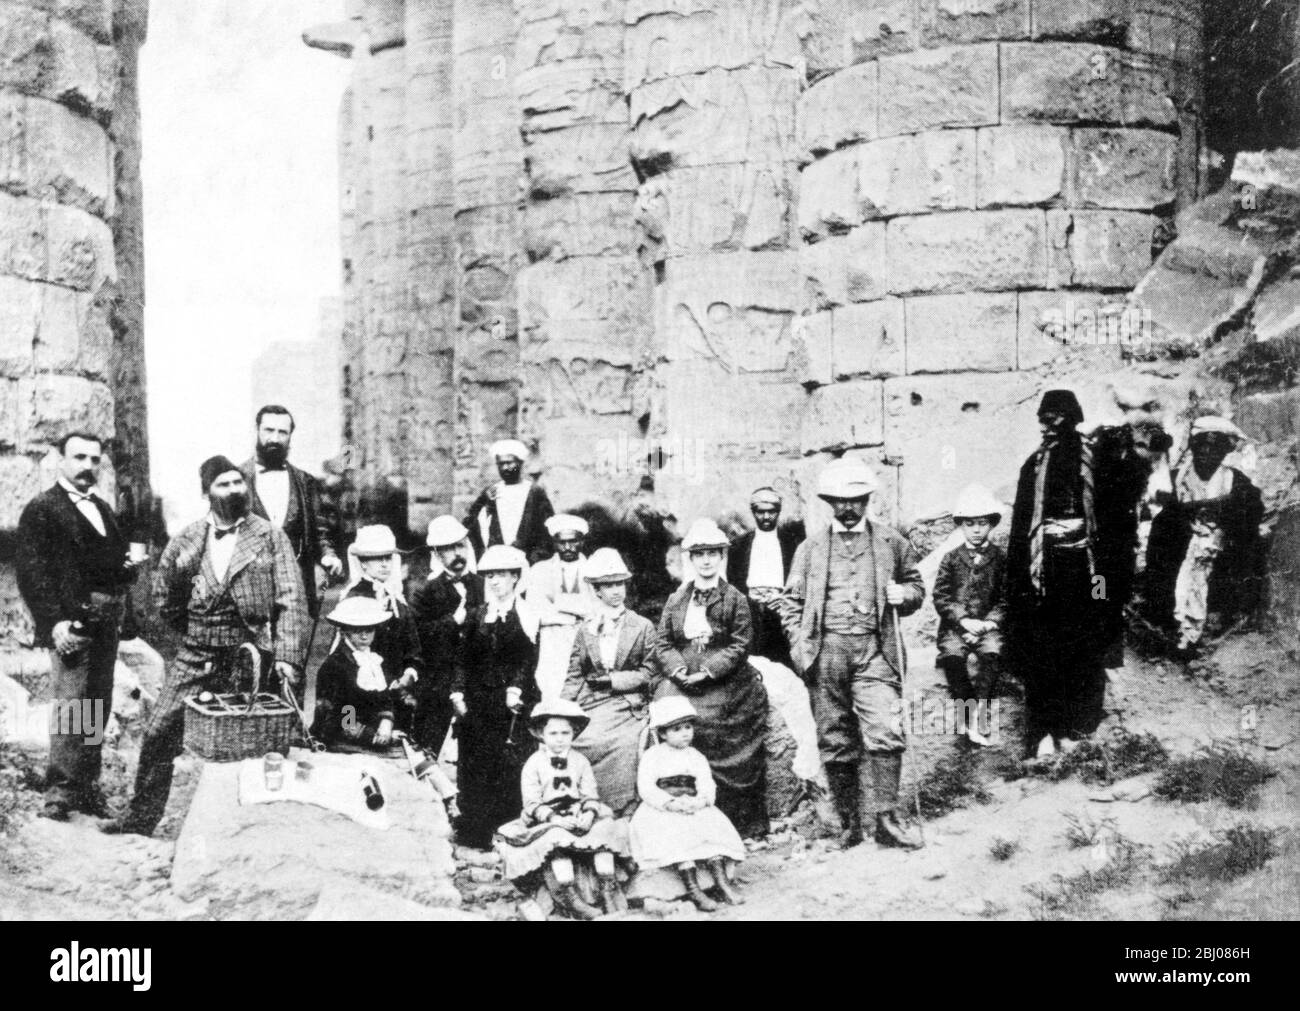 A family picnic at Karnak. Pierpont is standing with the stick, with Mrs Morgan on his right, Jack on his left, and his daughters, Annie (by the basket), Juliet and Louisa, sitting in front. The native standing on the right is the Consular Agent at Luxor; beside him is Jack, then Pierpont, his wife, and Mary Huntington, Abbie, the nurse, Caesar, Mrs Gibbons the maid, the dragoman, and Clemmy the waiter. Behind the dragoman is the doctor. The little girls (right to left) are Annie, Juliet, and Louisa. Stock Photo